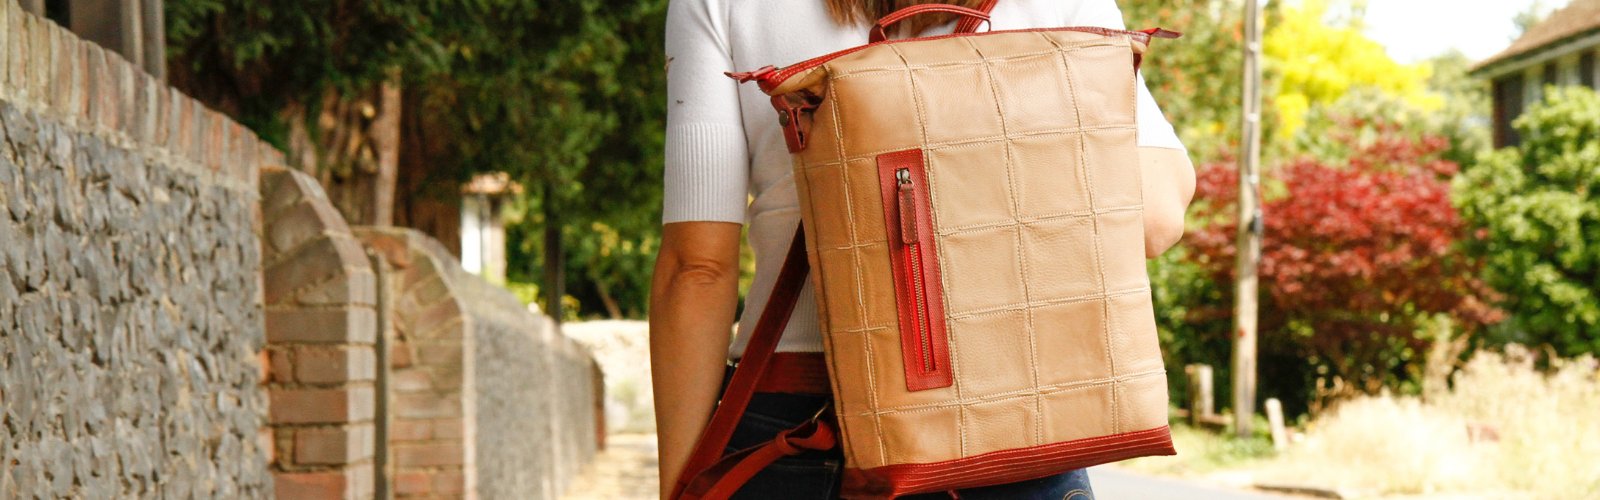 Reclaimed Leather Bags and Accessories - The Elvis & Kresse Fire & Hide Collection